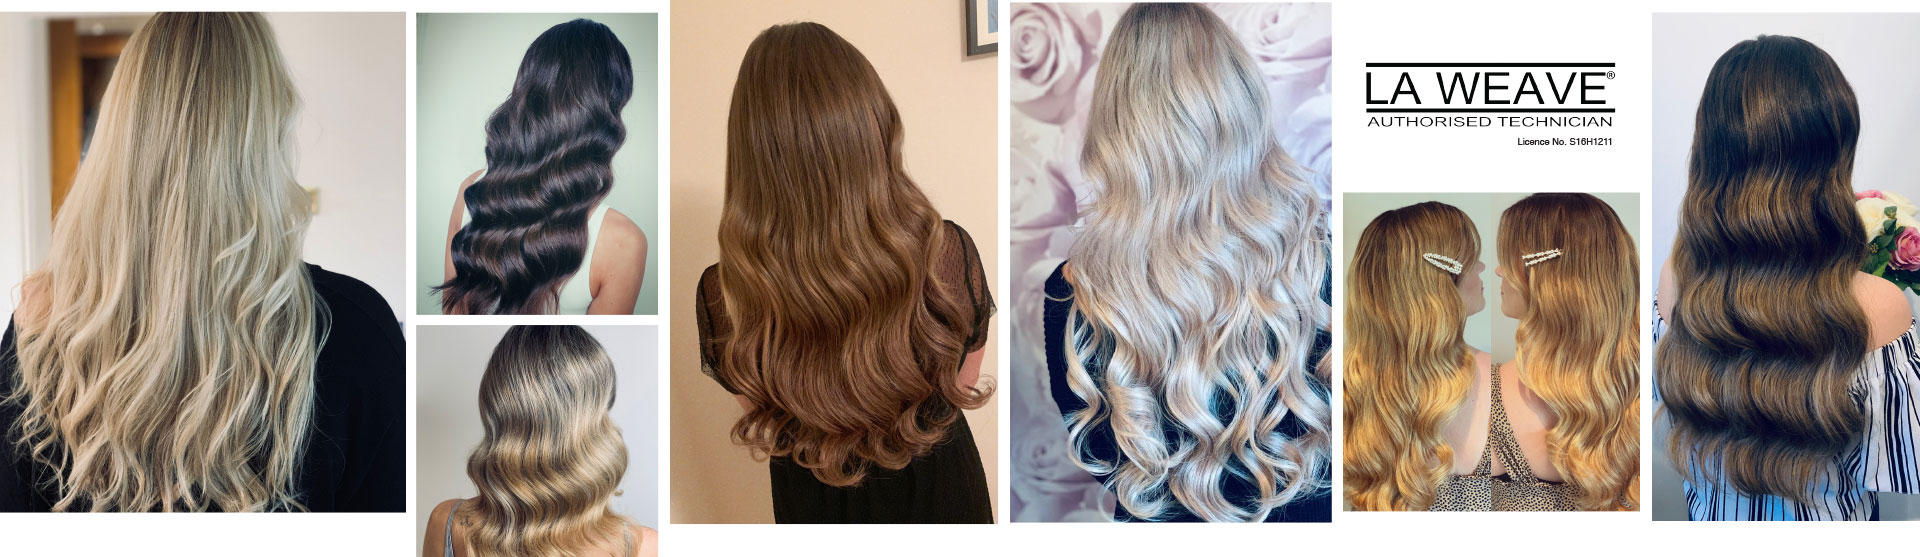 Affordable Weaves and Hair Extensions in Nottingham | Rock n Roller Hair